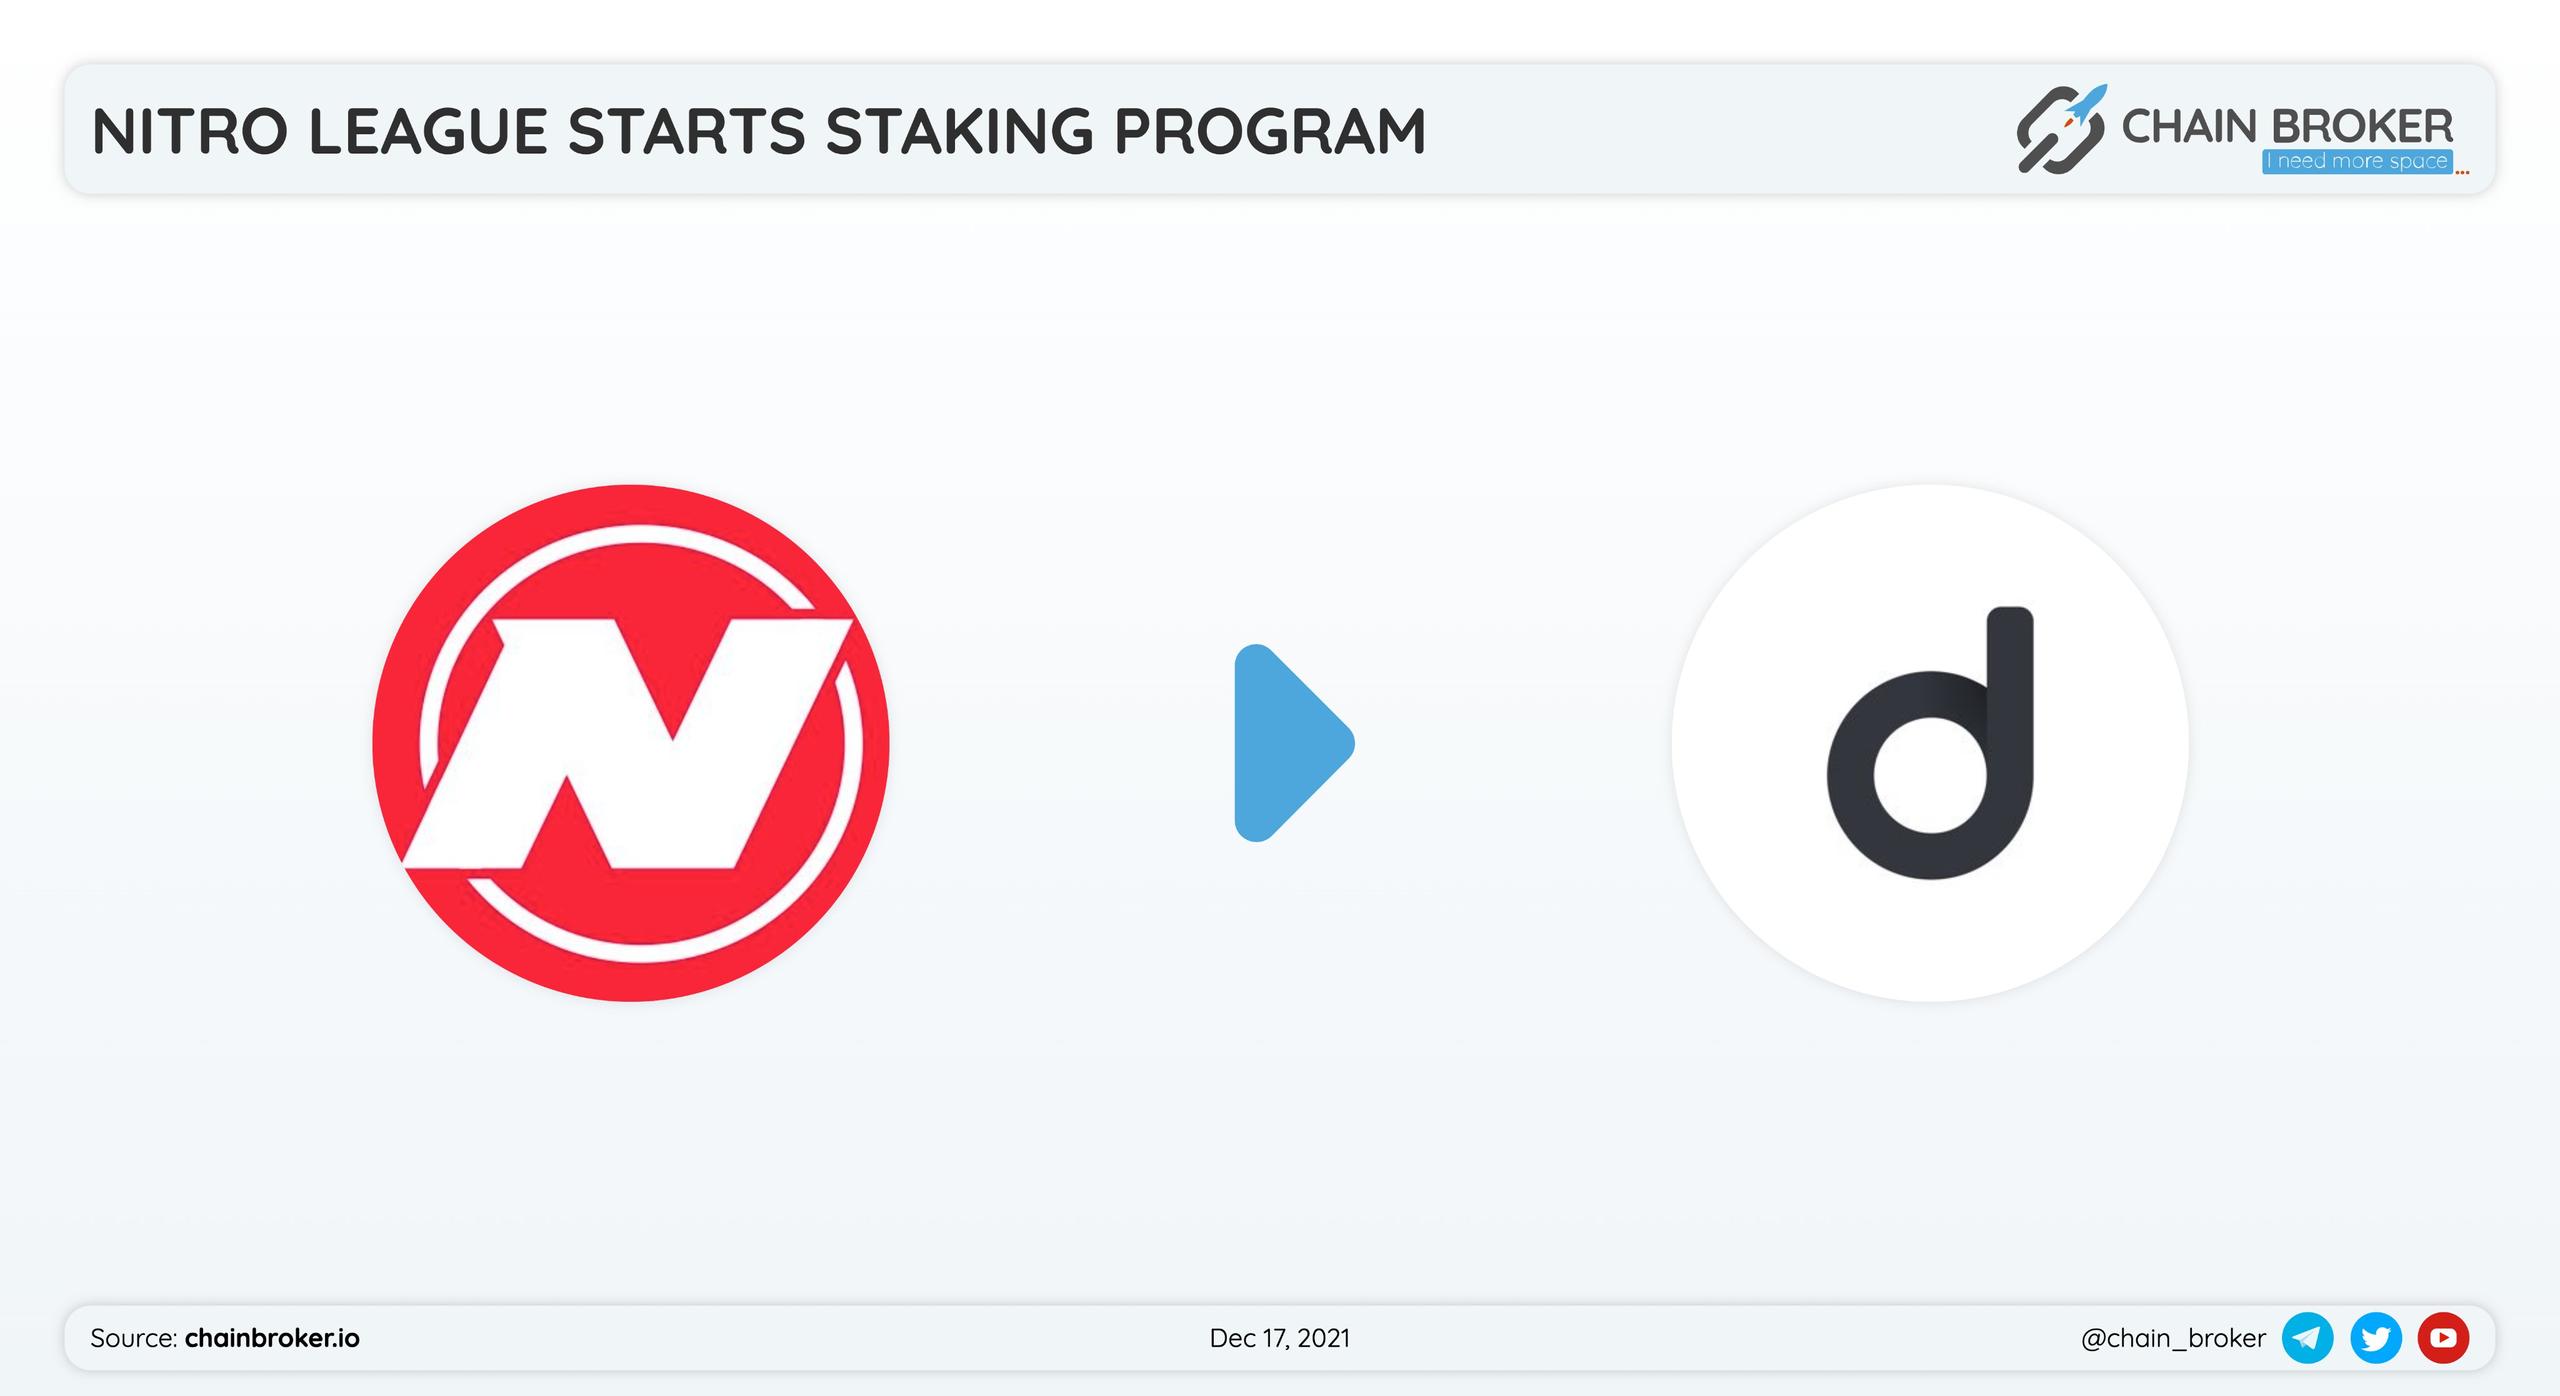 Nitro League with Dafi Protocol for the launch of staking program.